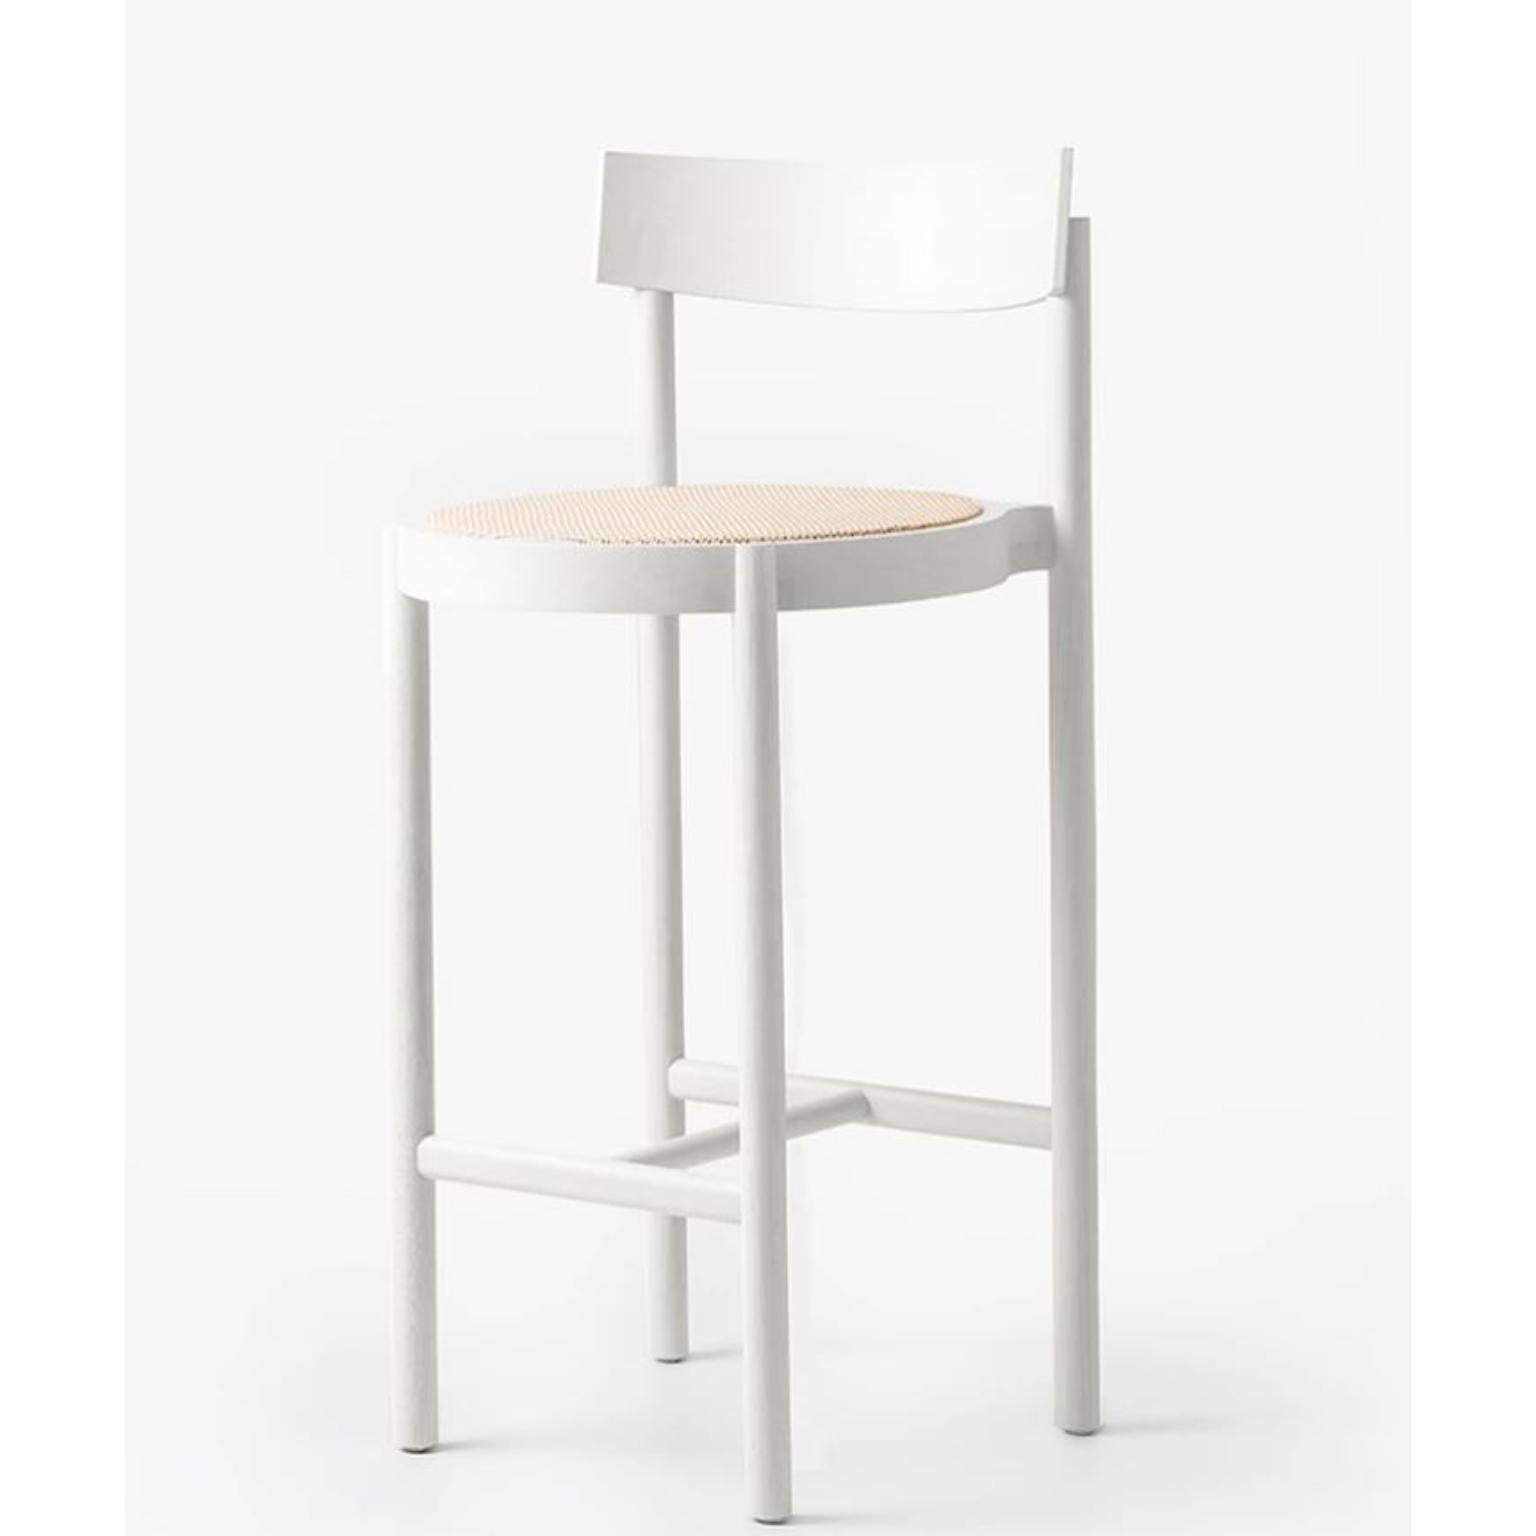 White Gravatá Bar Stool by Wentz
Dimensions: D 52 x W 47 x H 100 cm
Materials: Tauari Wood, Cane/Upholstery.
Weight: 4,4kg / 9,7 lbs

The Gravatá series synthesizes our vision regarding the functional and visual simplicity of furniture. Through soft